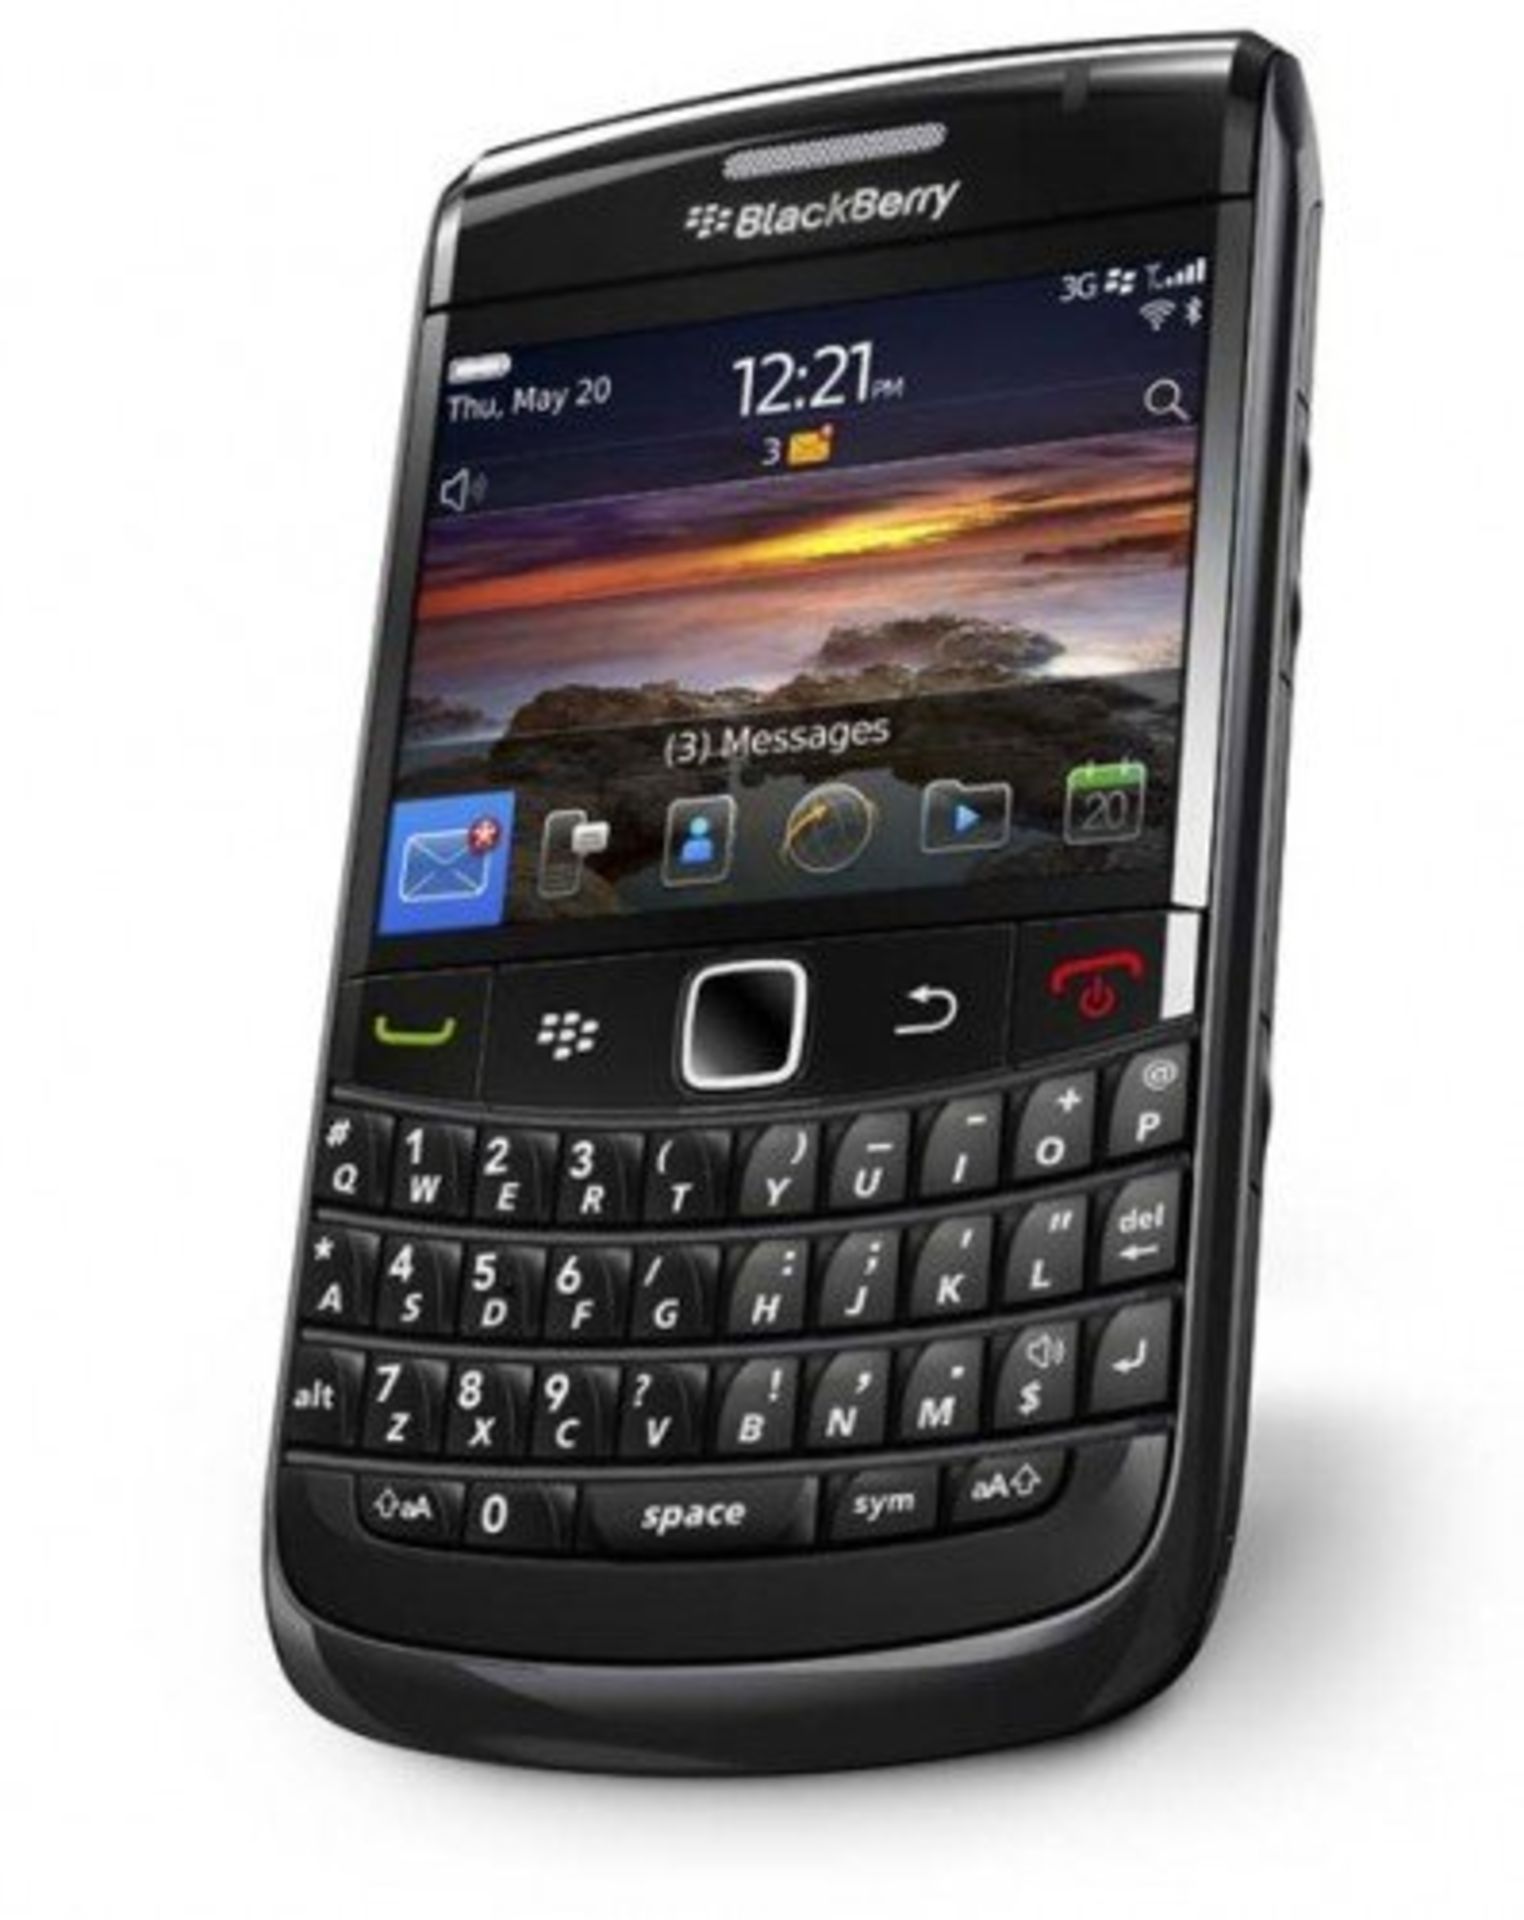 Grade A Blackberry 9780 Colours May Vary Item available approx 12 working days after sale - Image 2 of 2